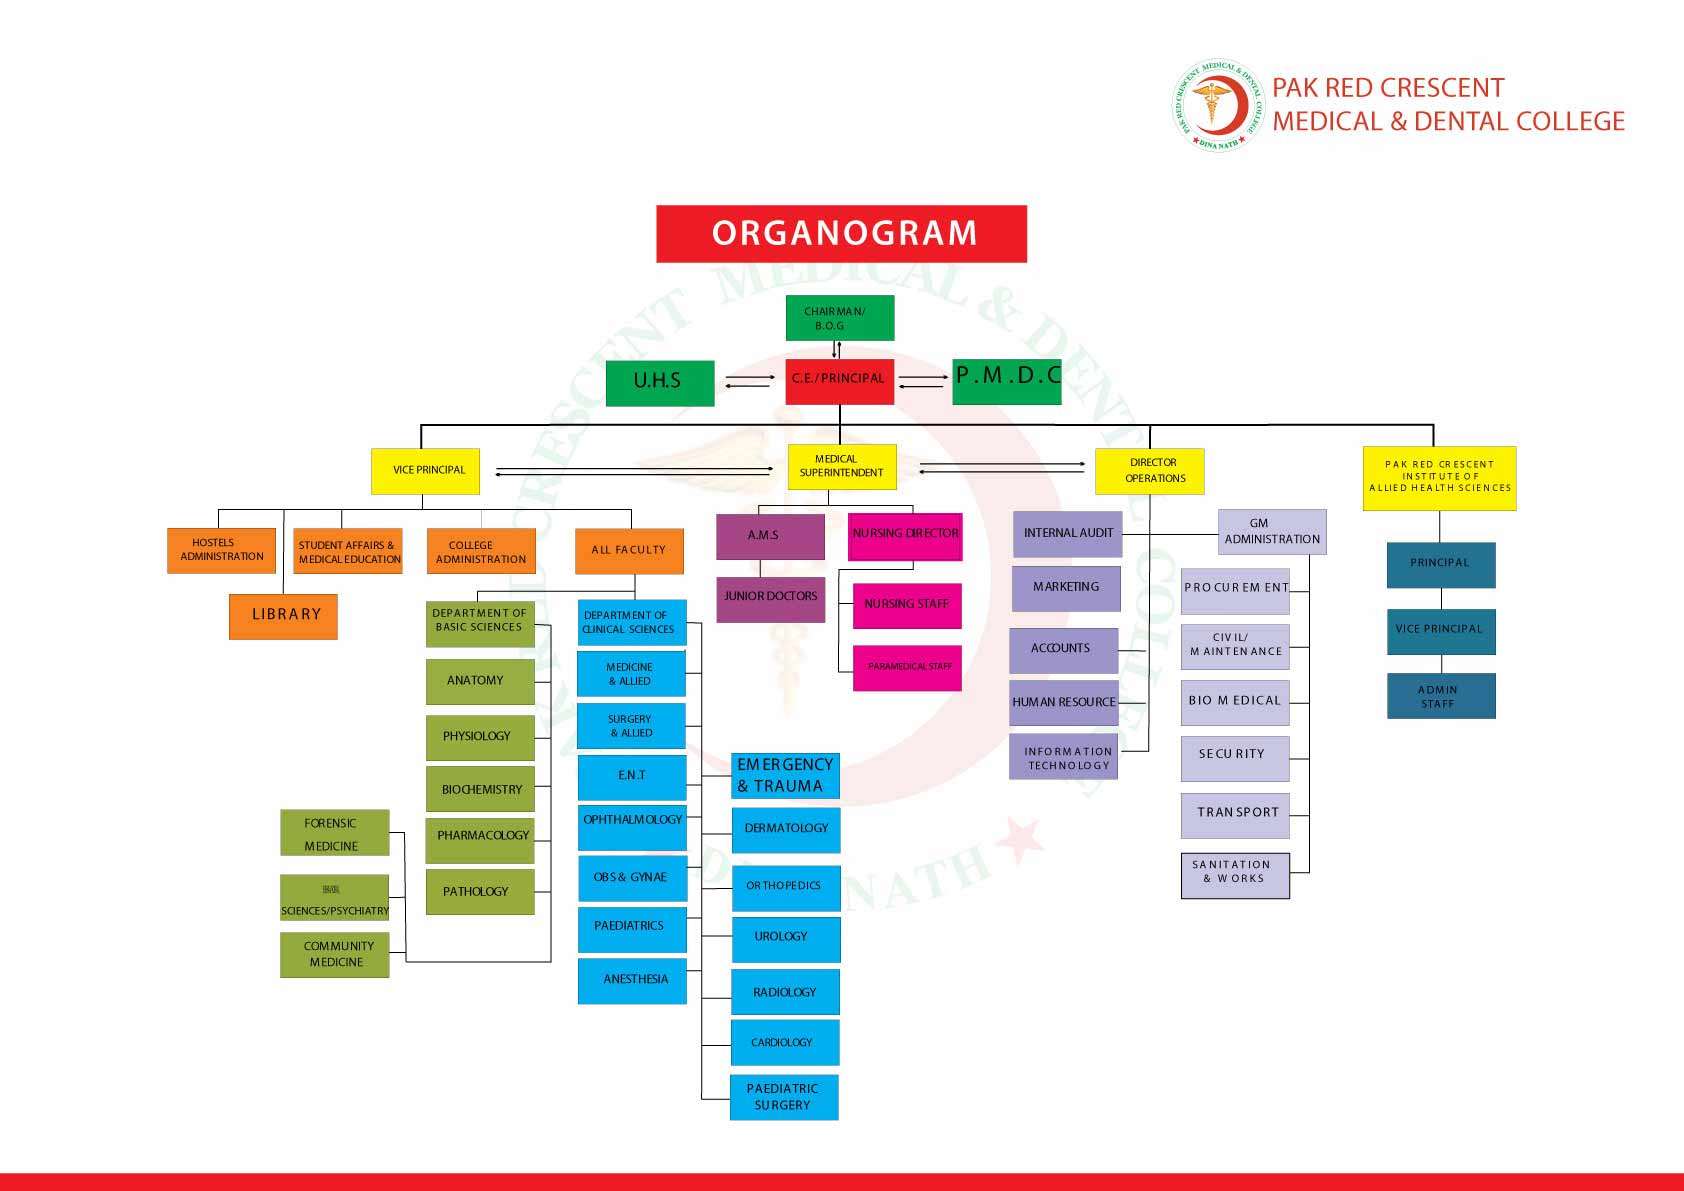 Pak Red Crescent Medical and Dental College - Organizational Structure